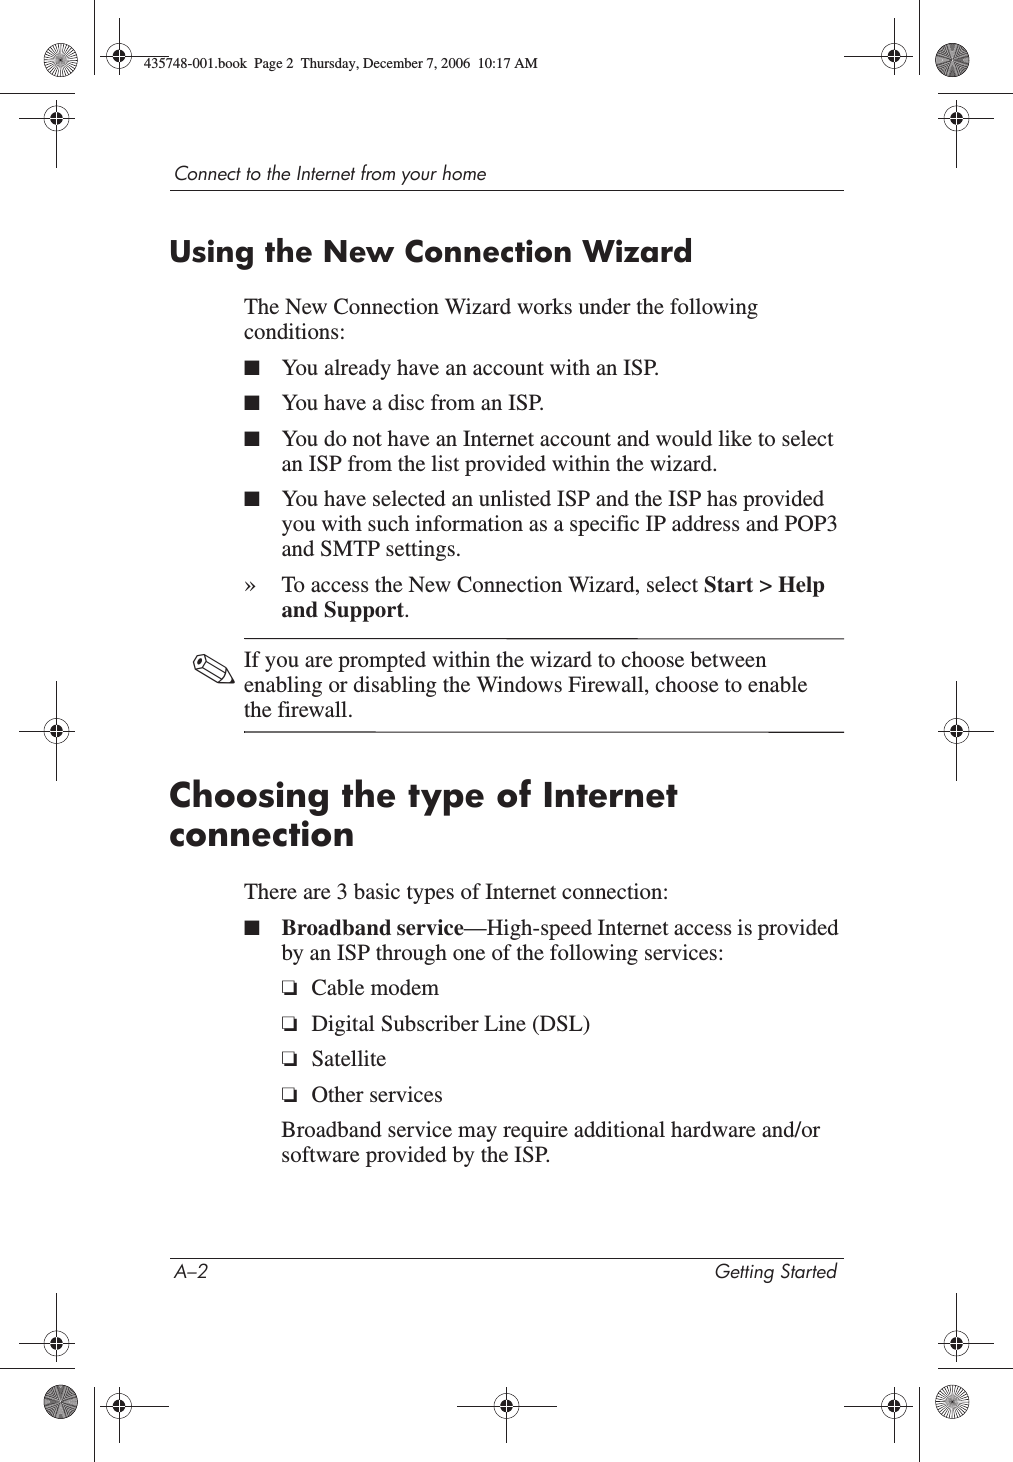 A–2 Getting StartedConnect to the Internet from your homeUsing the New Connection WizardThe New Connection Wizard works under the following conditions:■You already have an account with an ISP.■You have a disc from an ISP.■You do not have an Internet account and would like to select an ISP from the list provided within the wizard.■You have selected an unlisted ISP and the ISP has provided you with such information as a specific IP address and POP3 and SMTP settings.»To access the New Connection Wizard, select Start &gt; Help and Support.✎If you are prompted within the wizard to choose between enabling or disabling the Windows Firewall, choose to enable the firewall. Choosing the type of Internet connection There are 3 basic types of Internet connection:■Broadband service—High-speed Internet access is provided by an ISP through one of the following services:❏Cable modem❏Digital Subscriber Line (DSL)❏Satellite❏Other servicesBroadband service may require additional hardware and/or software provided by the ISP.435748-001.book  Page 2  Thursday, December 7, 2006  10:17 AM